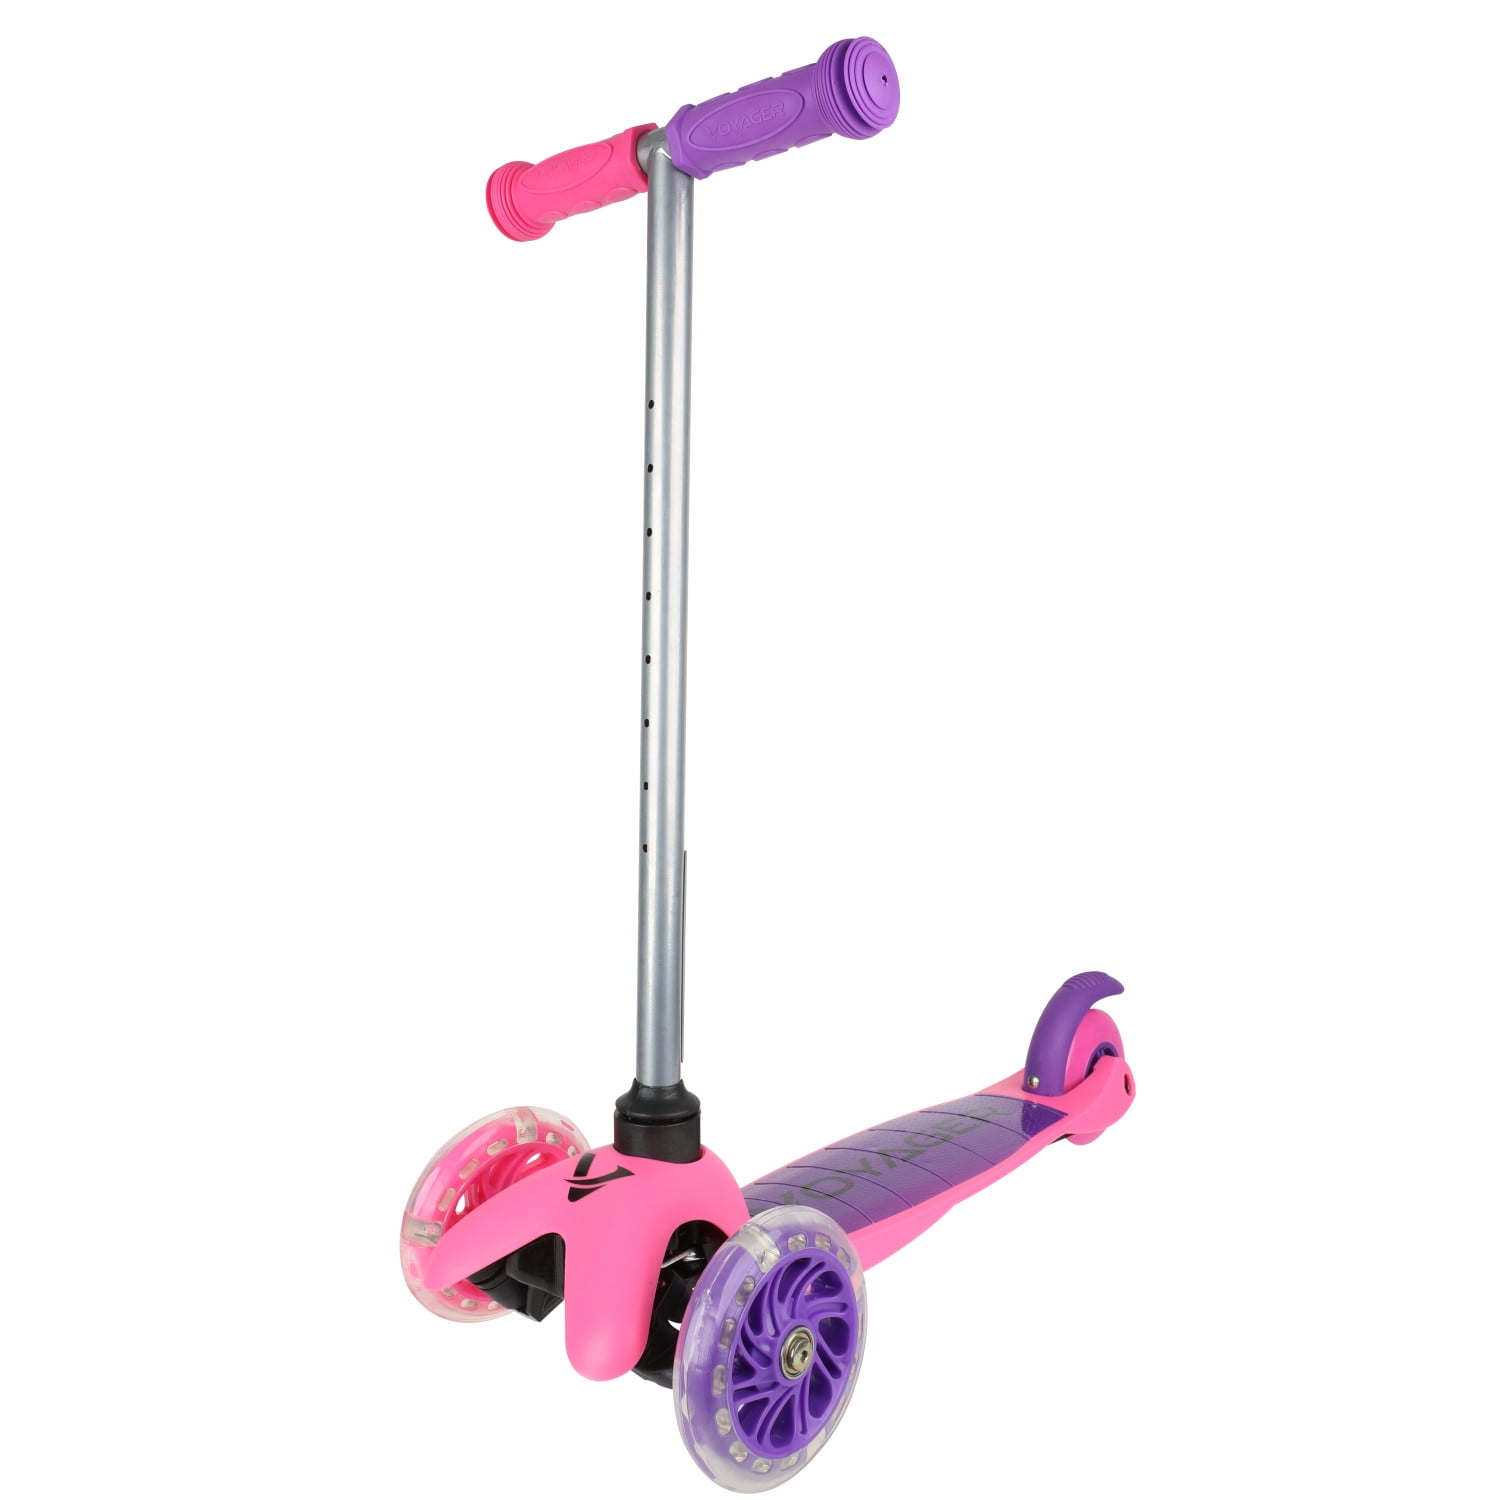 Ignight 3 Wheel Pink Scooter with Light-up Wheels and Frame, for Kids Ages  3+